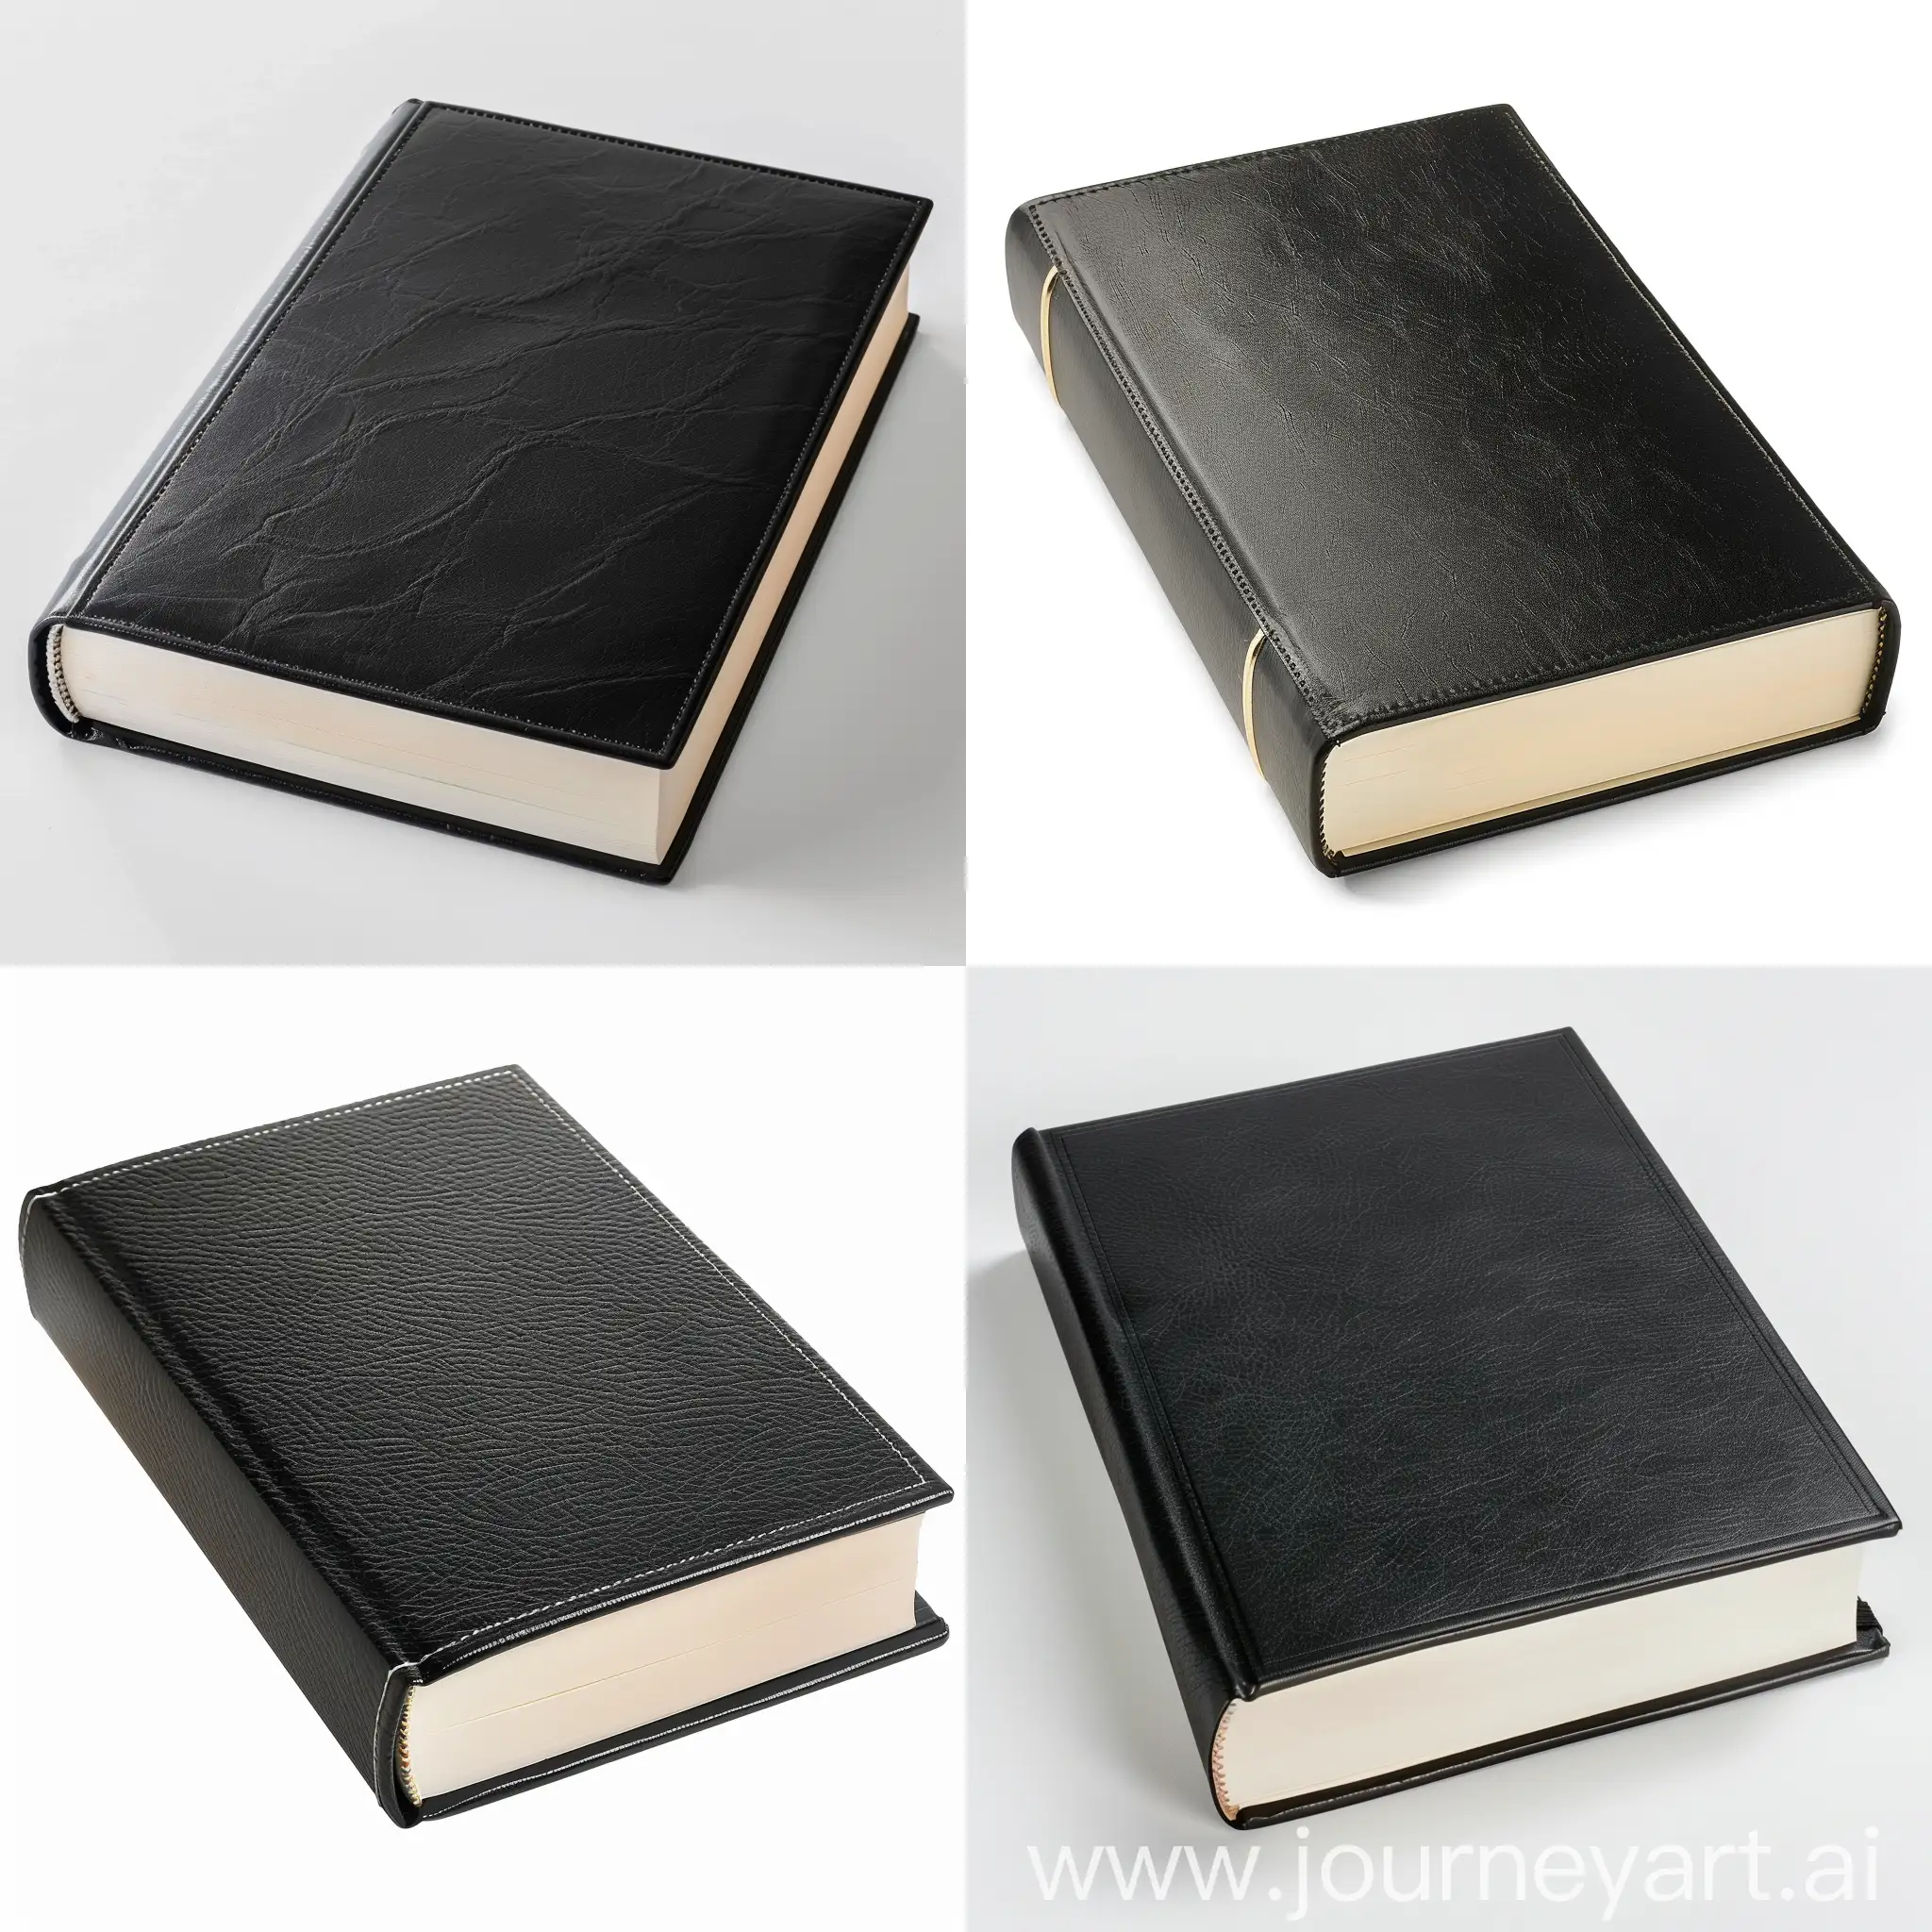 new stylish black book, front view